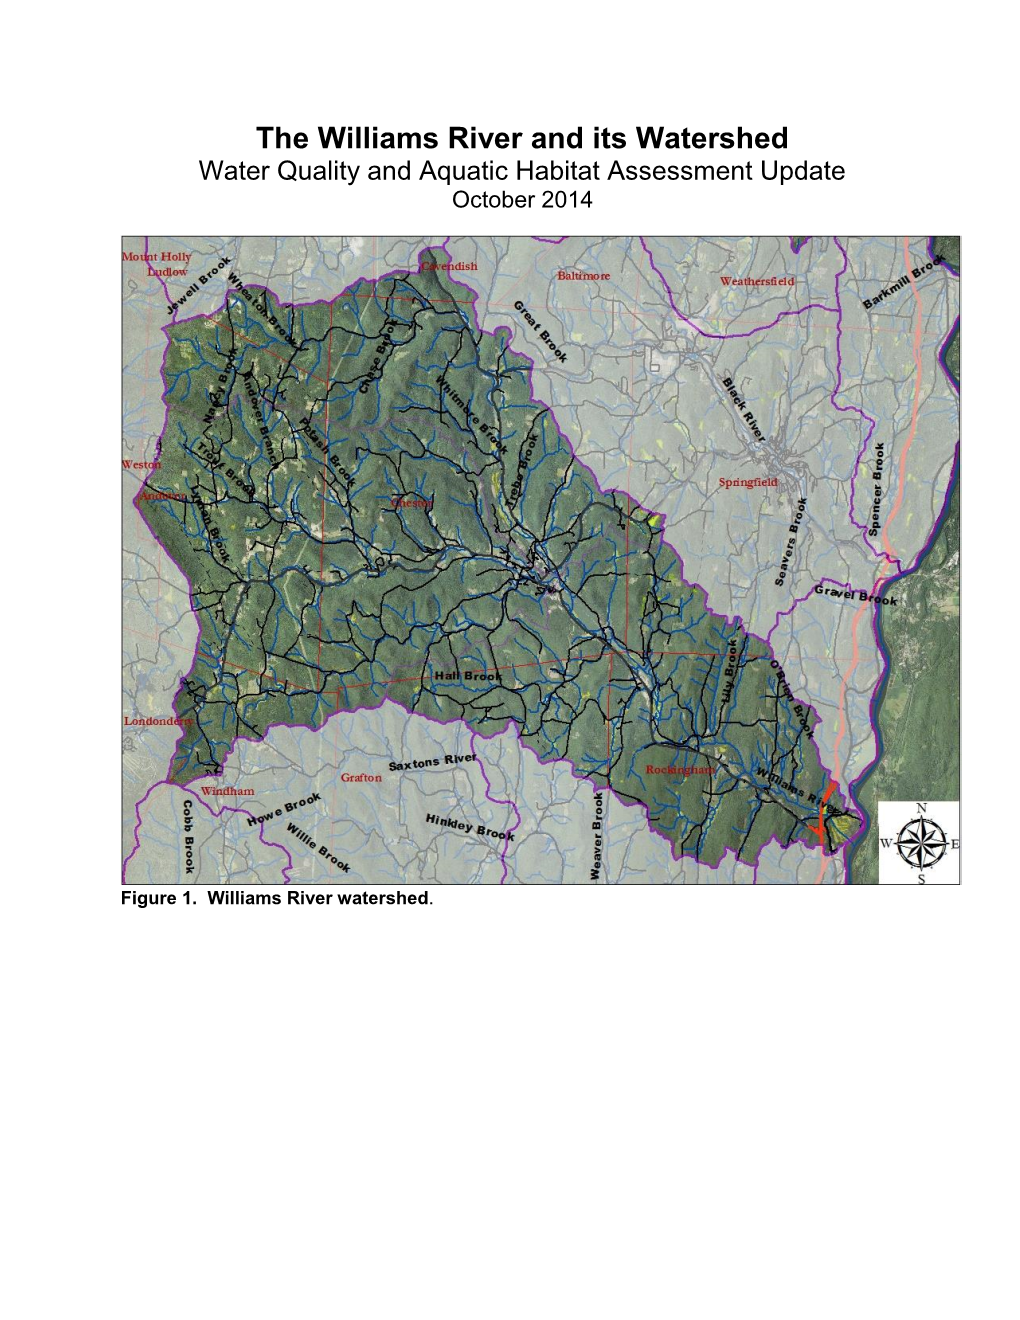 The Williams River and Its Watershed Water Quality and Aquatic Habitat Assessment Update October 2014